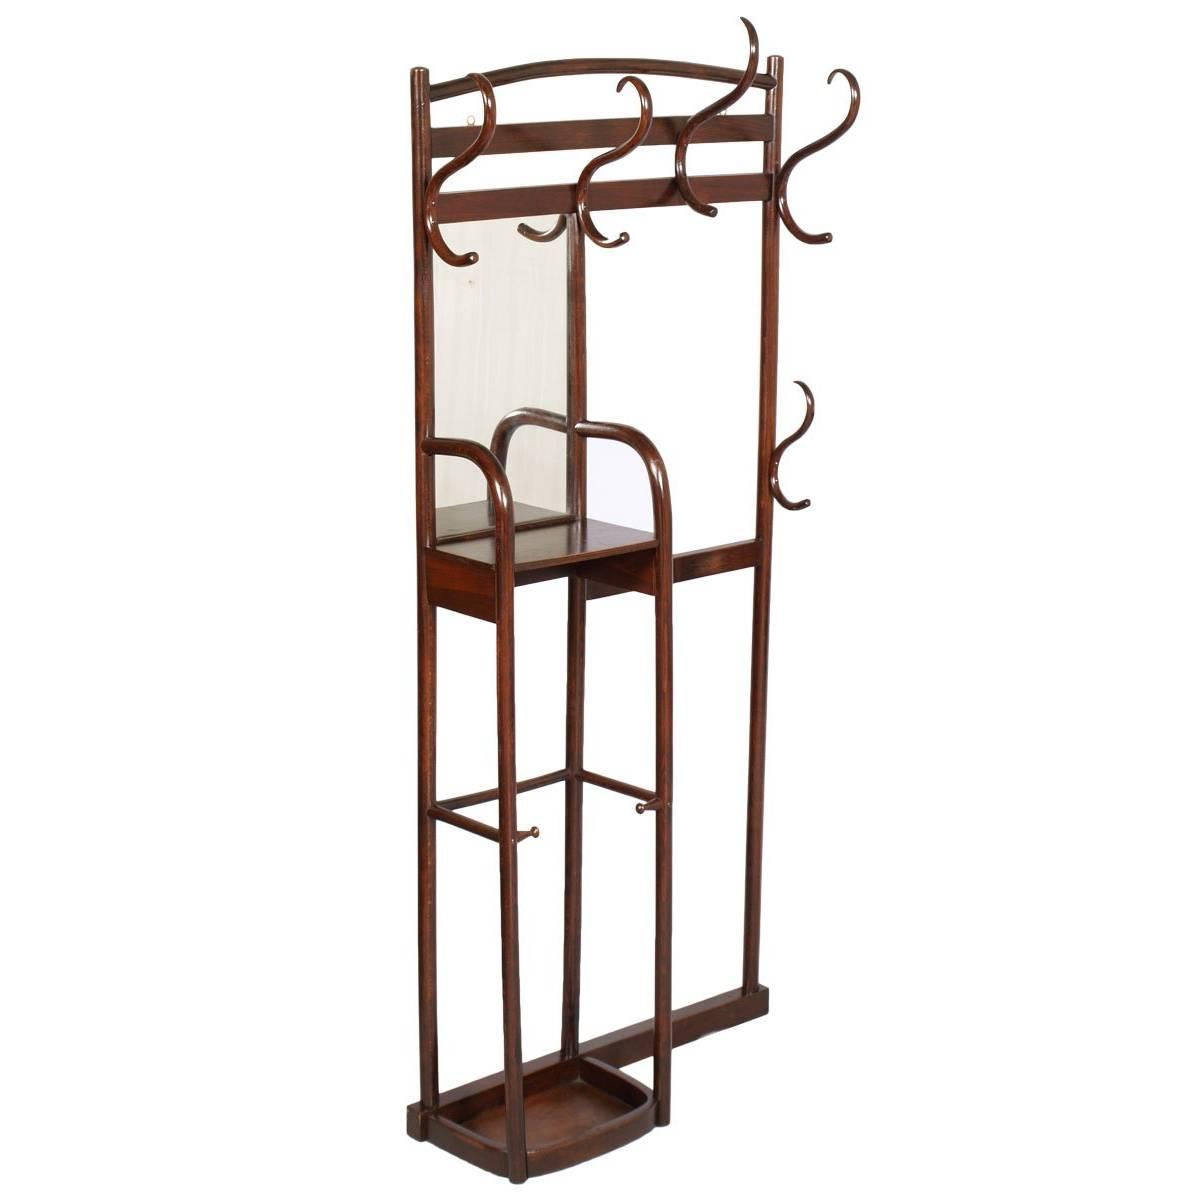 19TH Century Entrance Coat-Rack Hanger with Mirror by Thonet